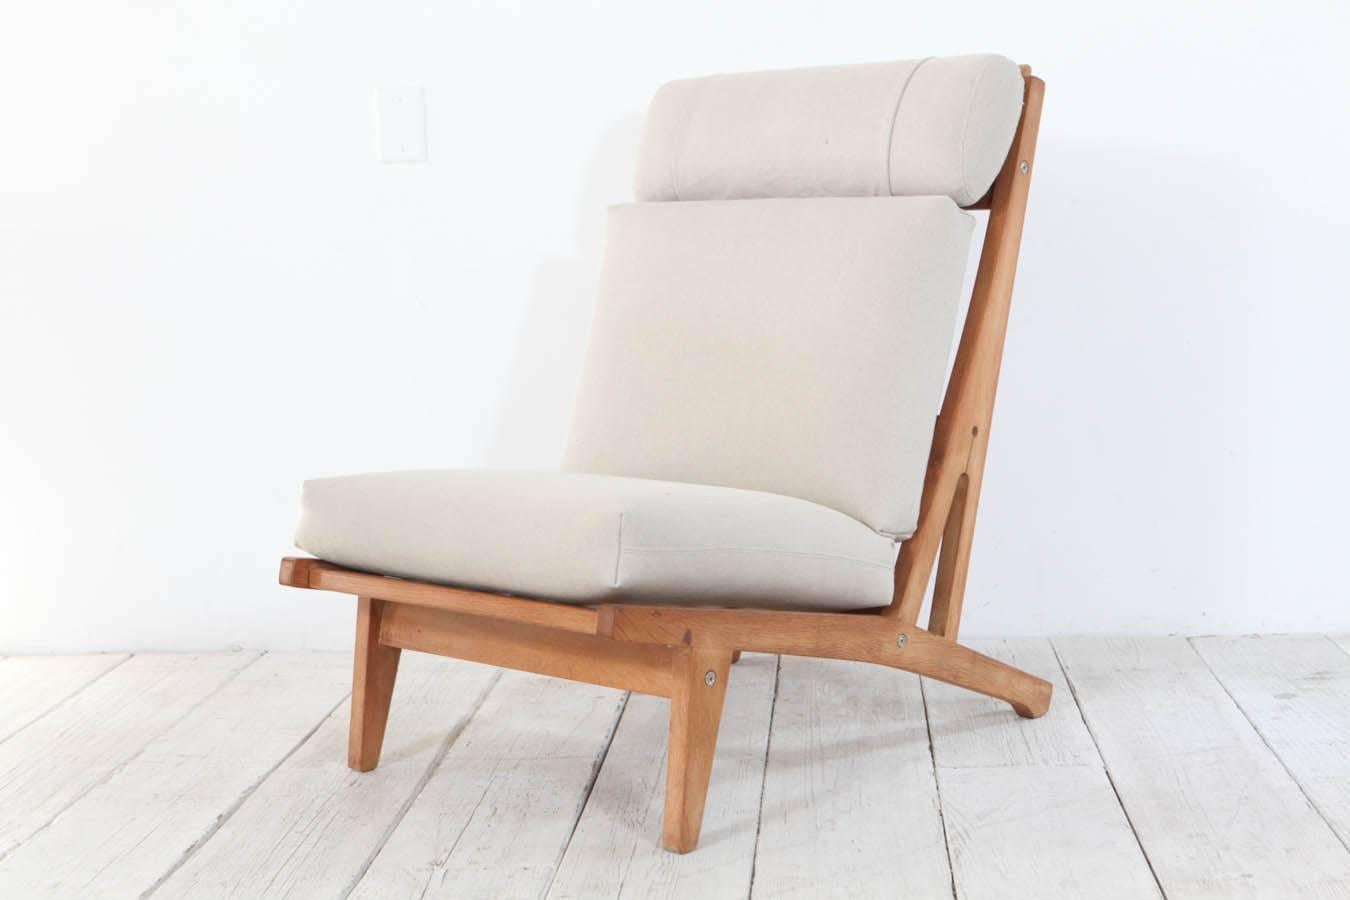 Classic Hans Wegner pair of oak chairs and new linen upholstery. Sold as a pair.